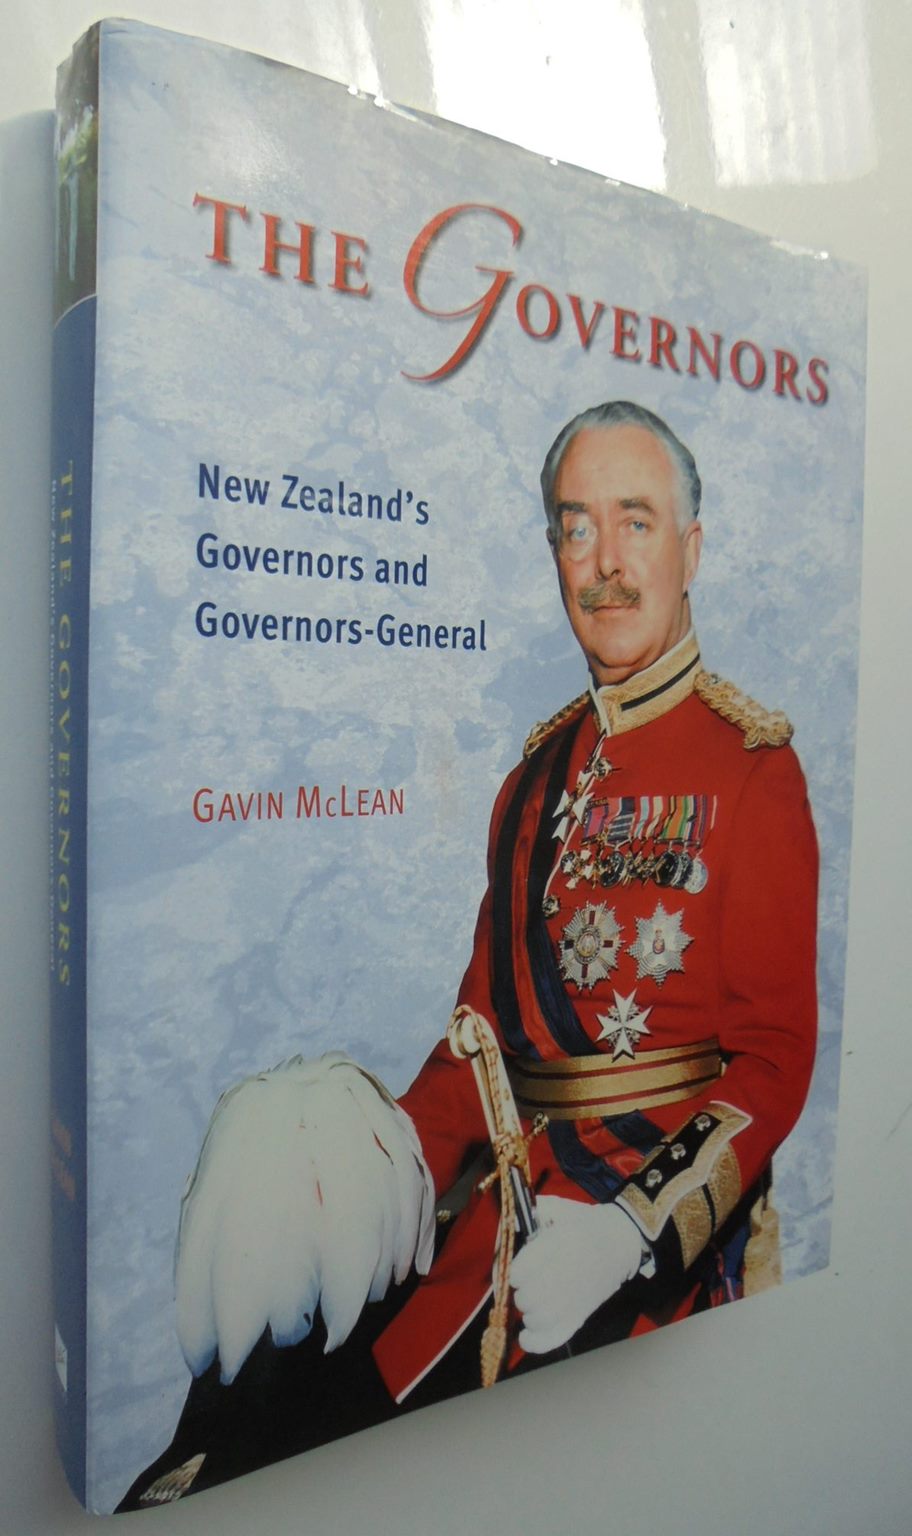 The Governors. New Zealand's Governors and Governors-General. - Gavin McLean.